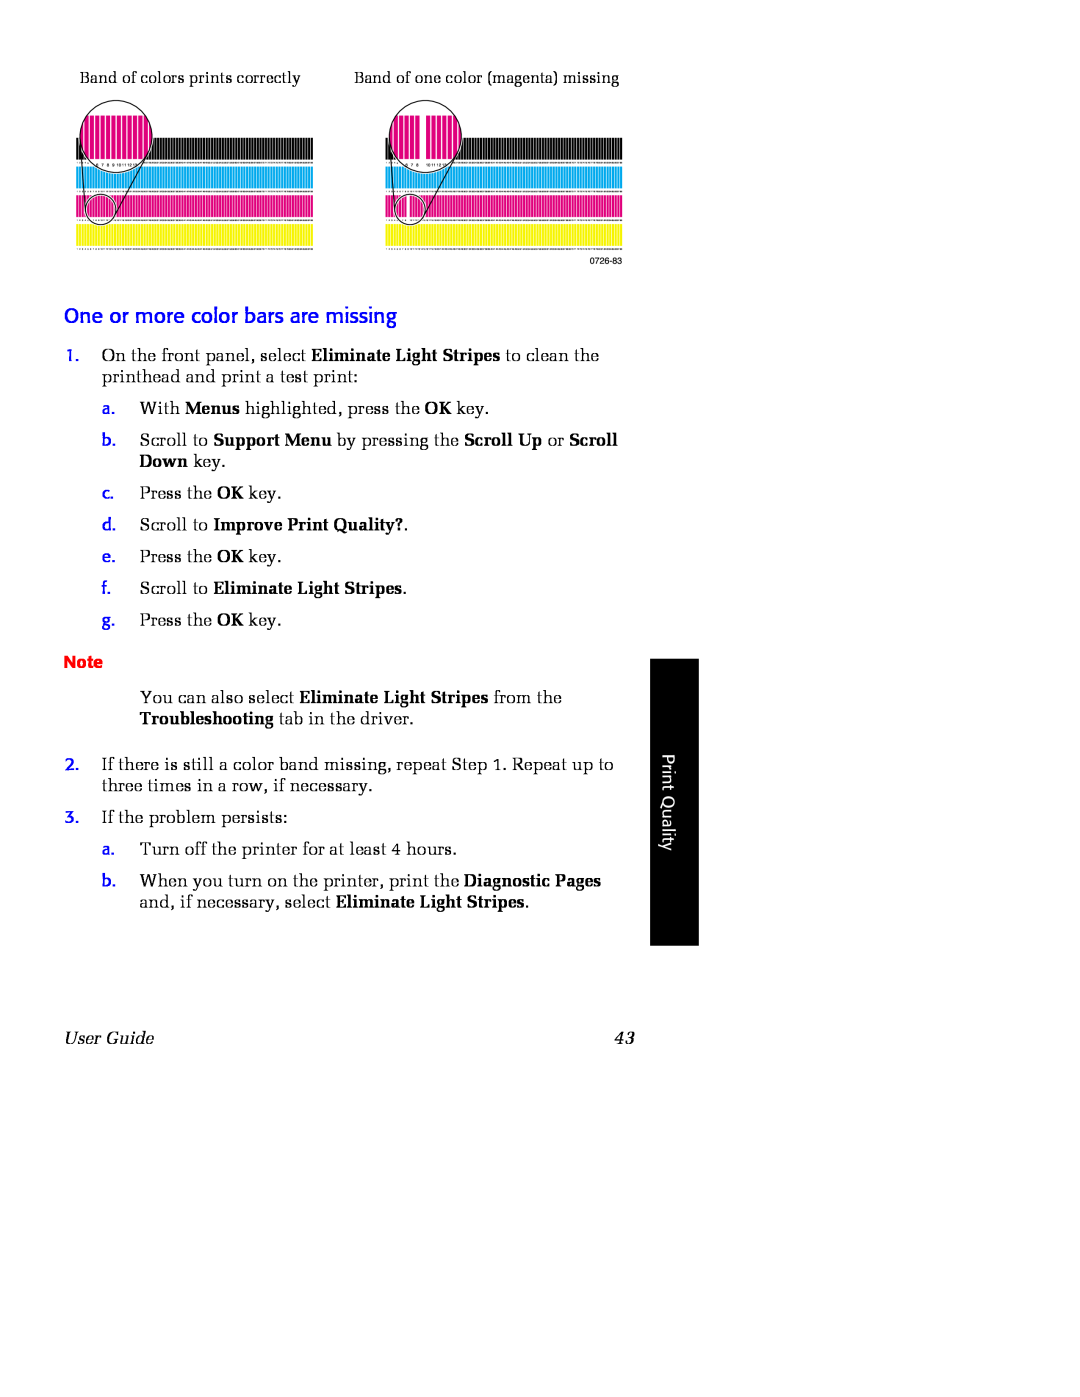 Xerox Phaser 860 manual One or more color bars are missing, d. Scroll to Improve Print Quality?, User Guide 